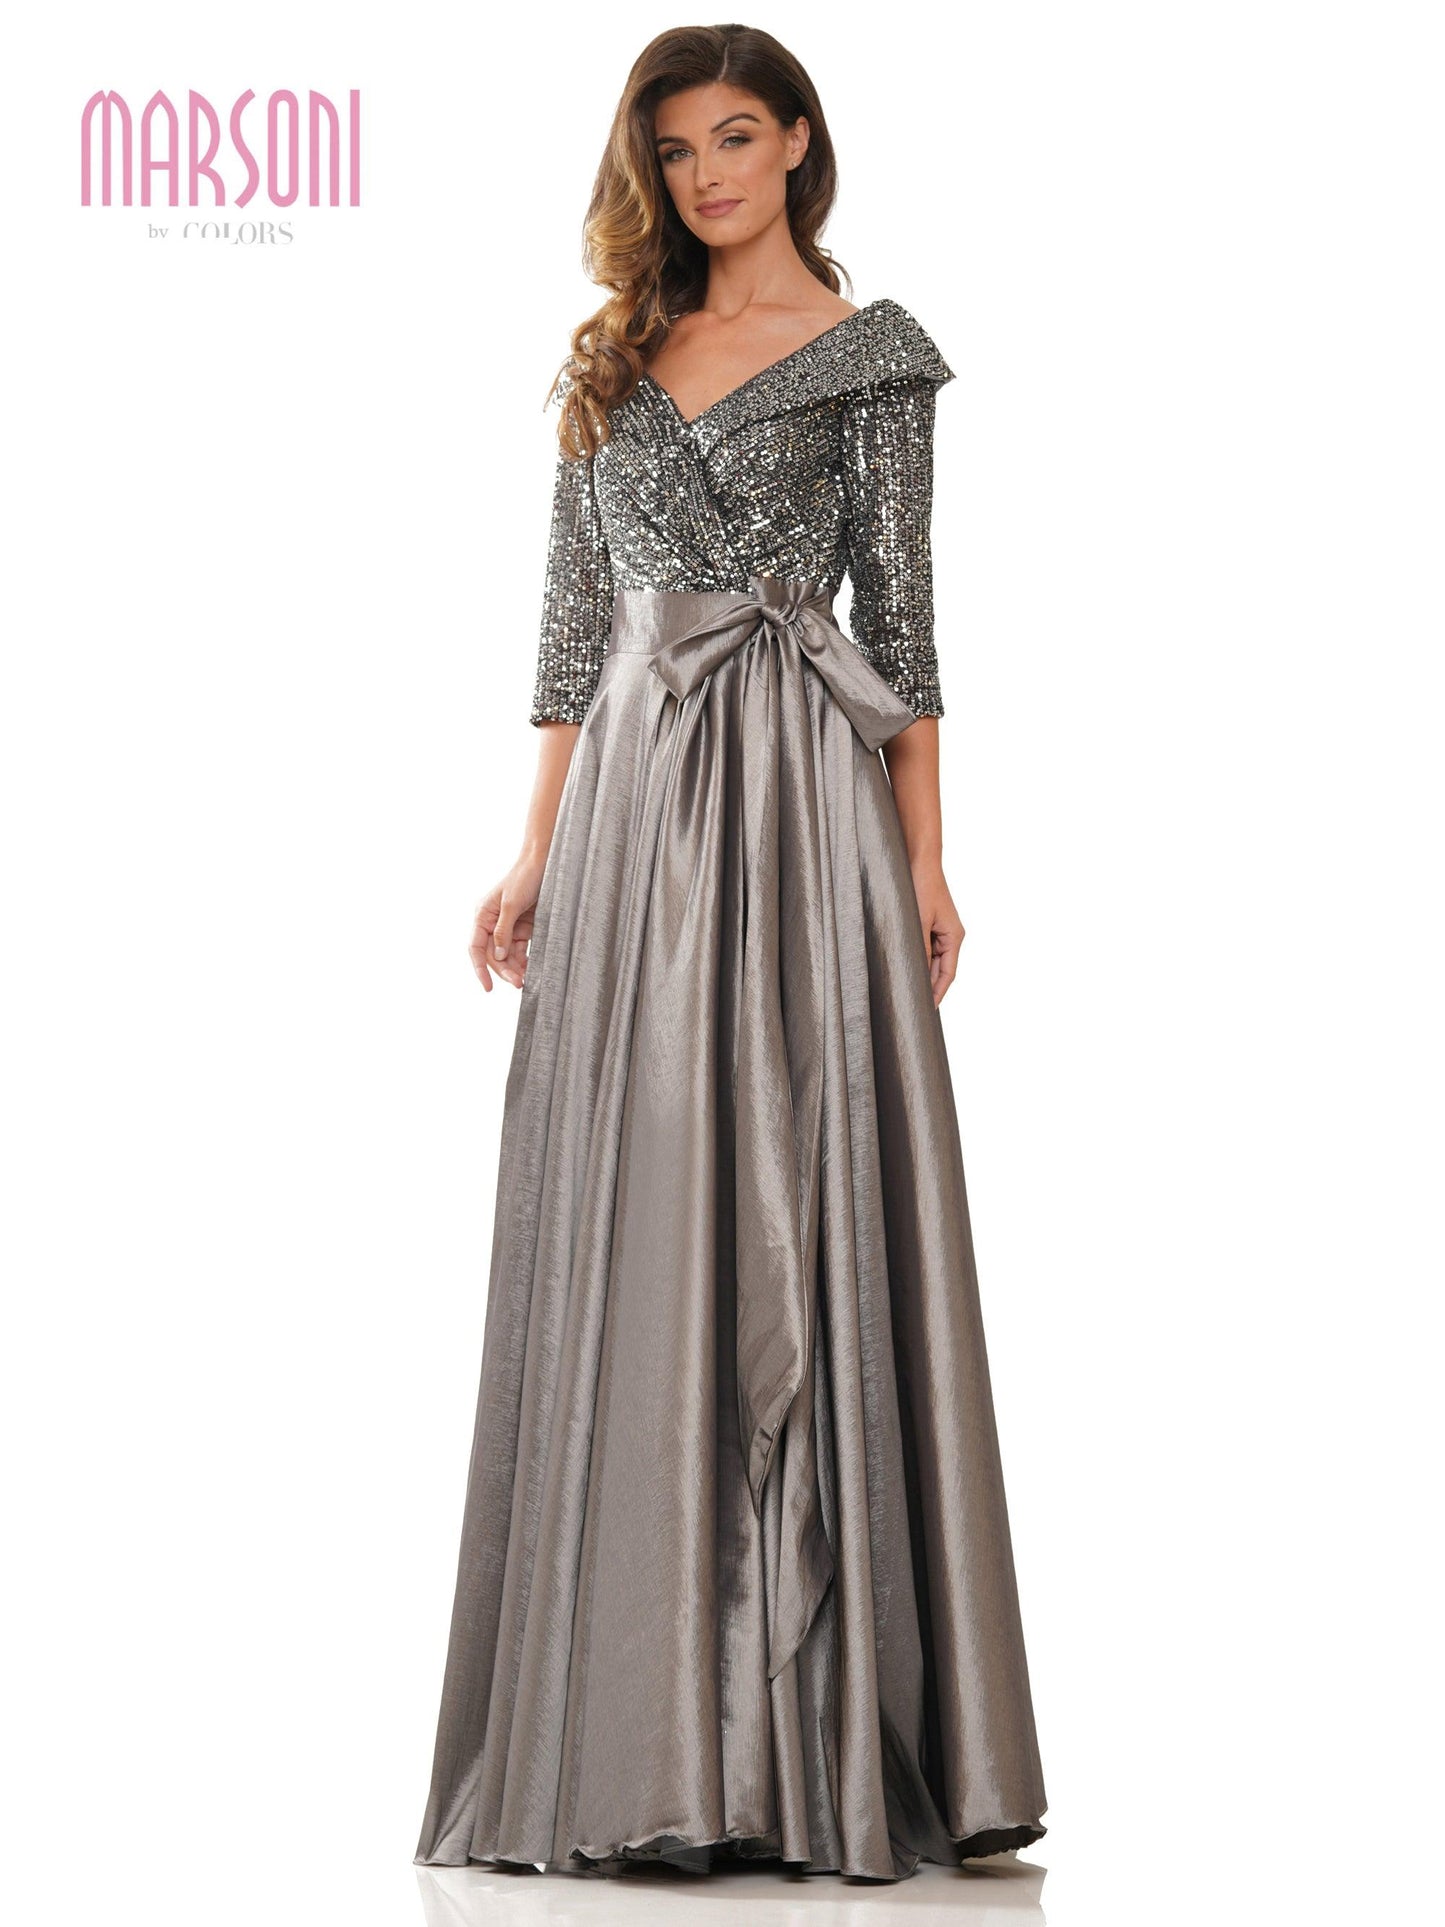 Marsoni Long Mother of the Bride Formal Dress M317 - The Dress Outlet